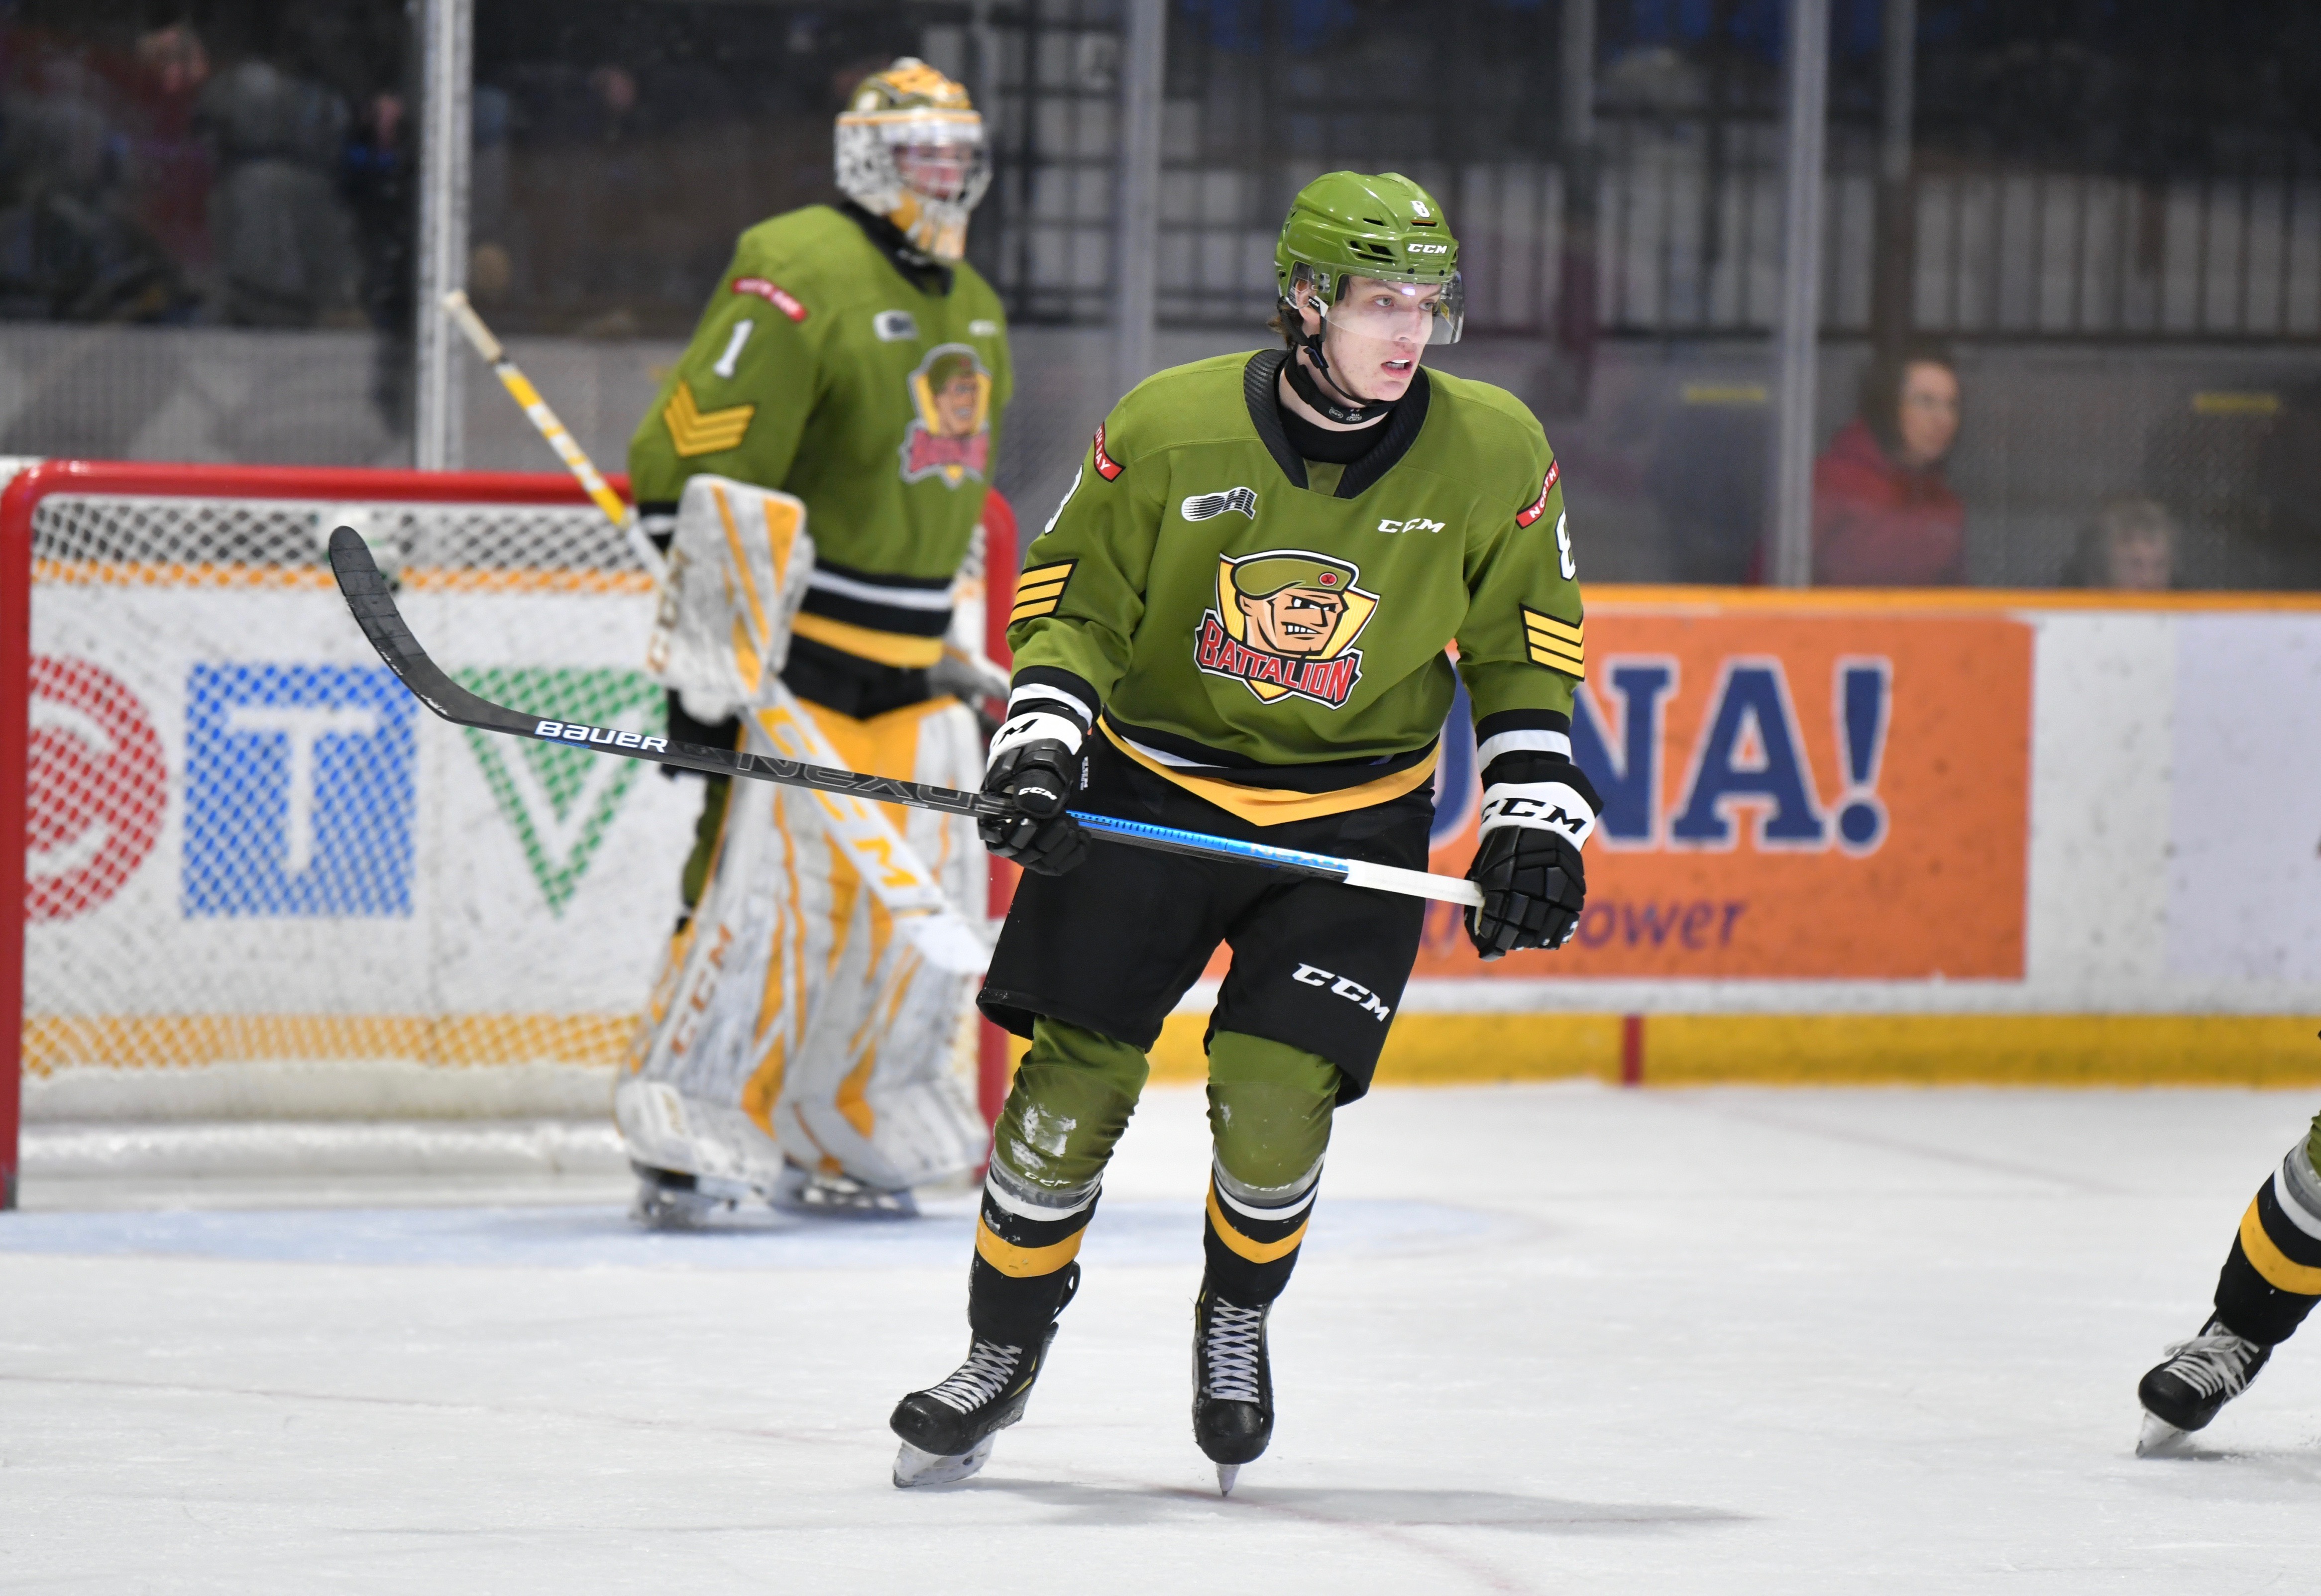 north bay battalion jersey for sale